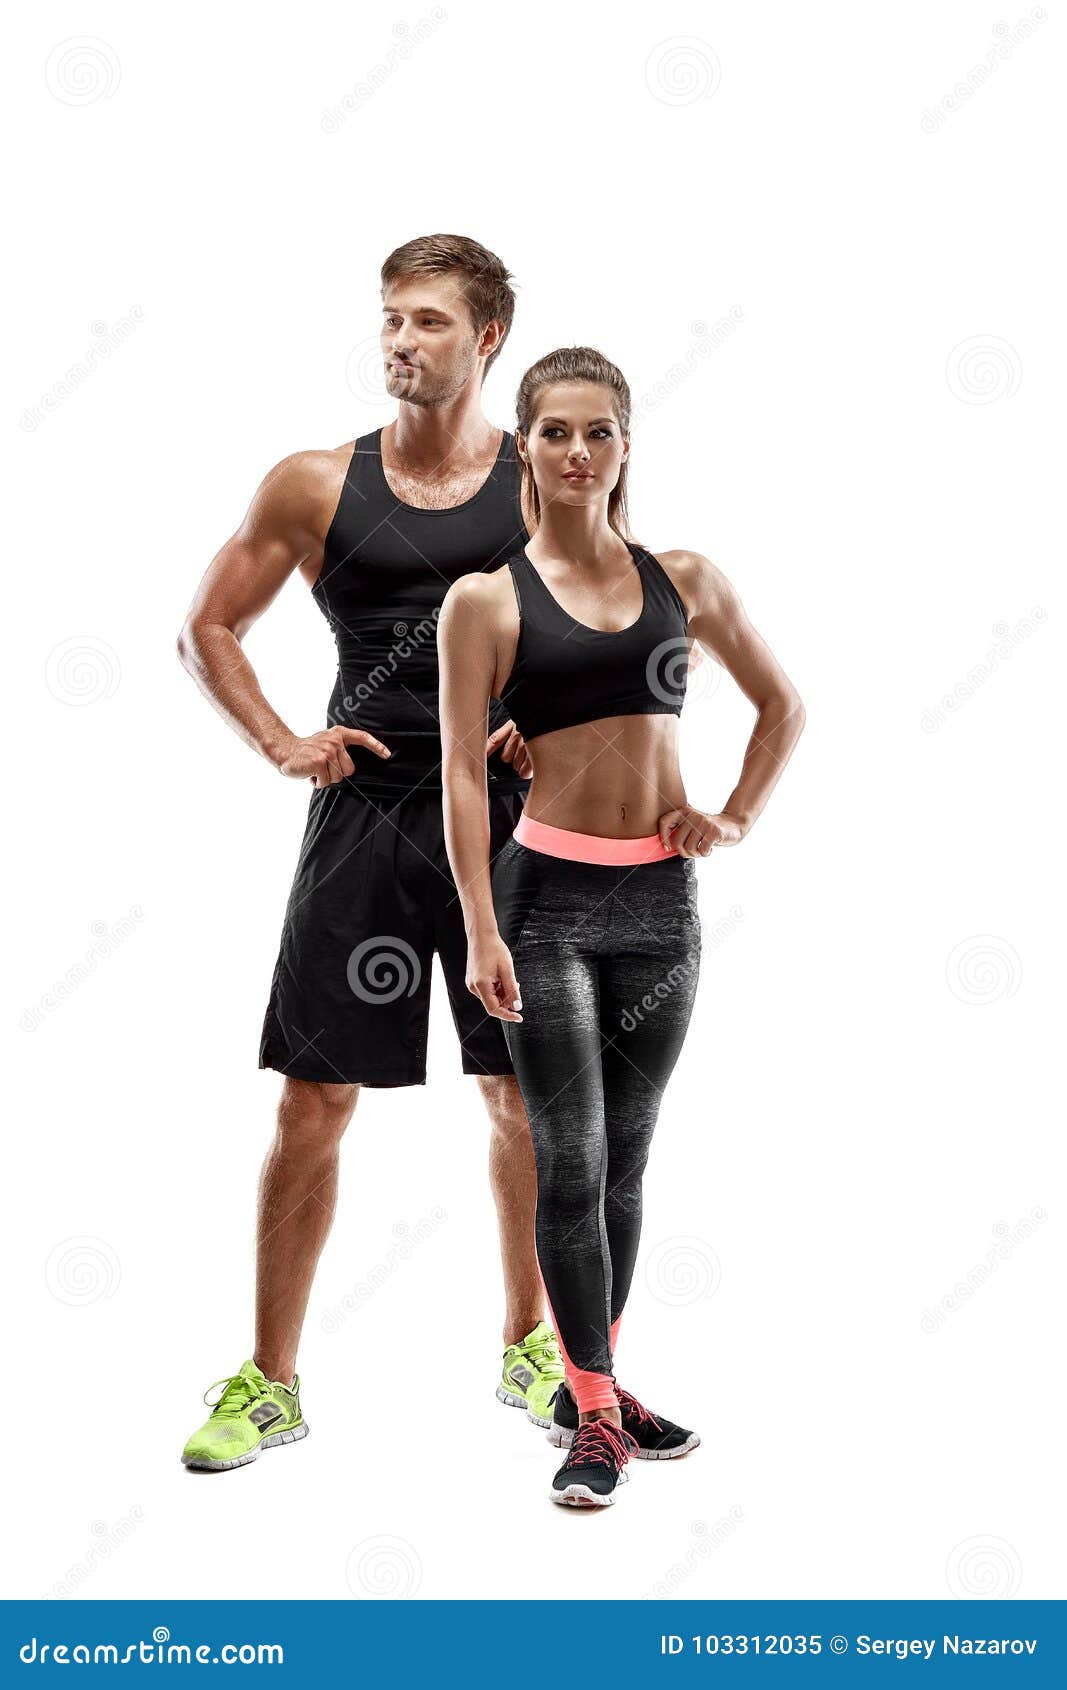 sport, fitness, workout concept. fit couple, strong muscular man and slim woman posing on a white background